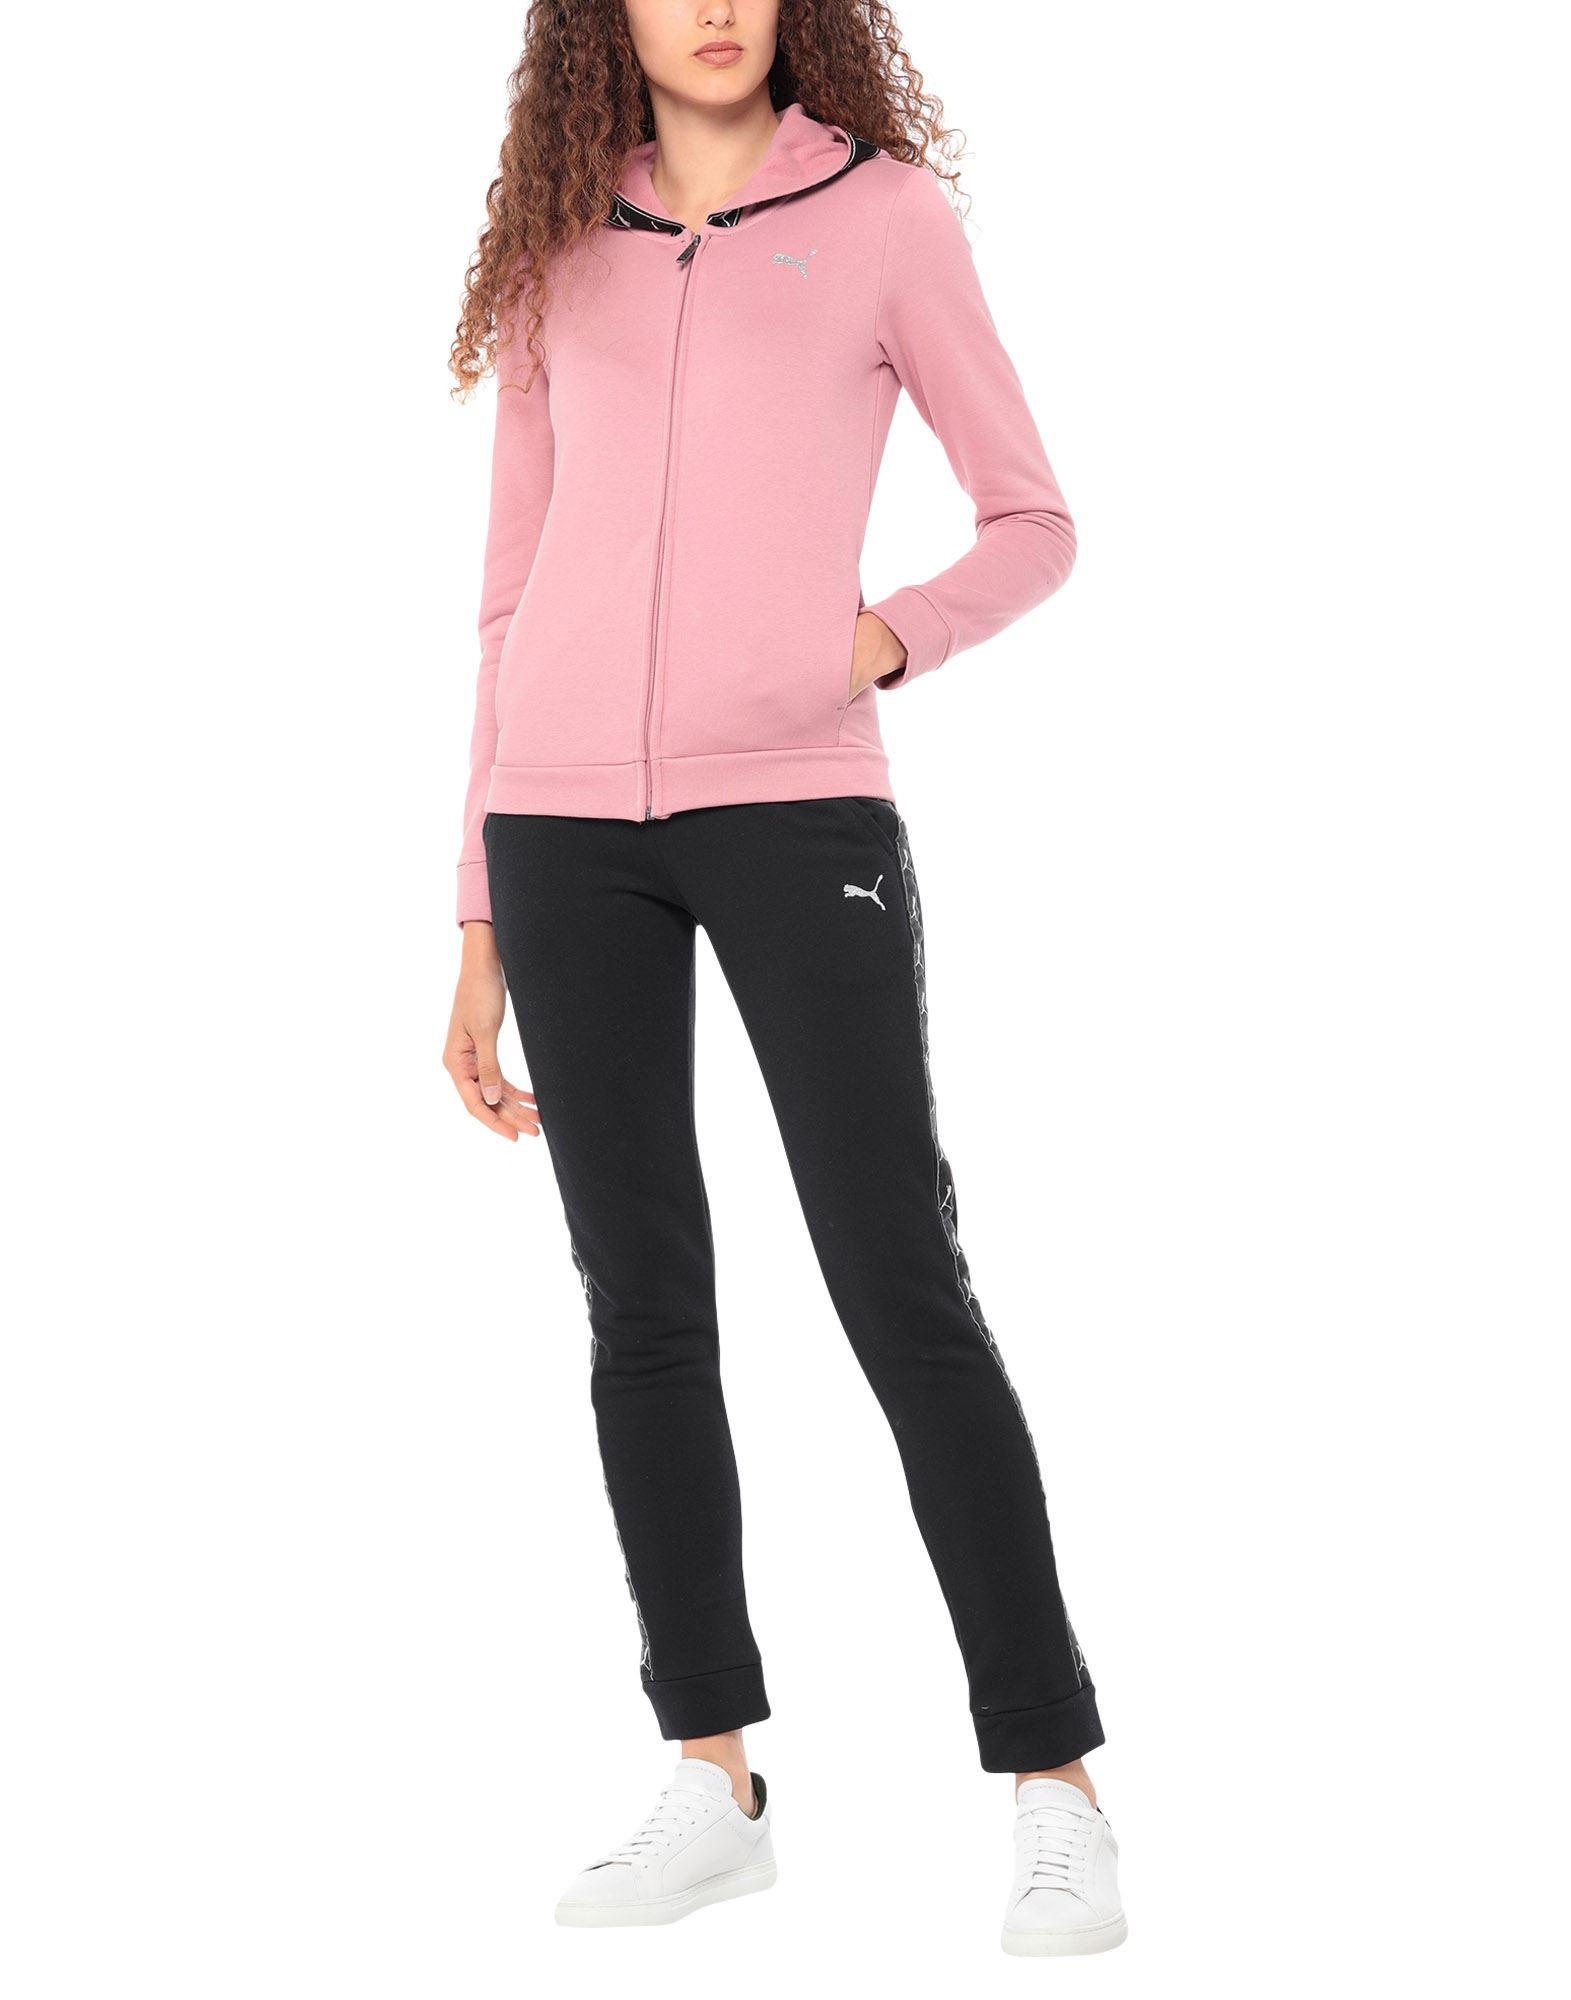 PUMA Satin Tracksuit in Pastel Pink (Pink) - Lyst